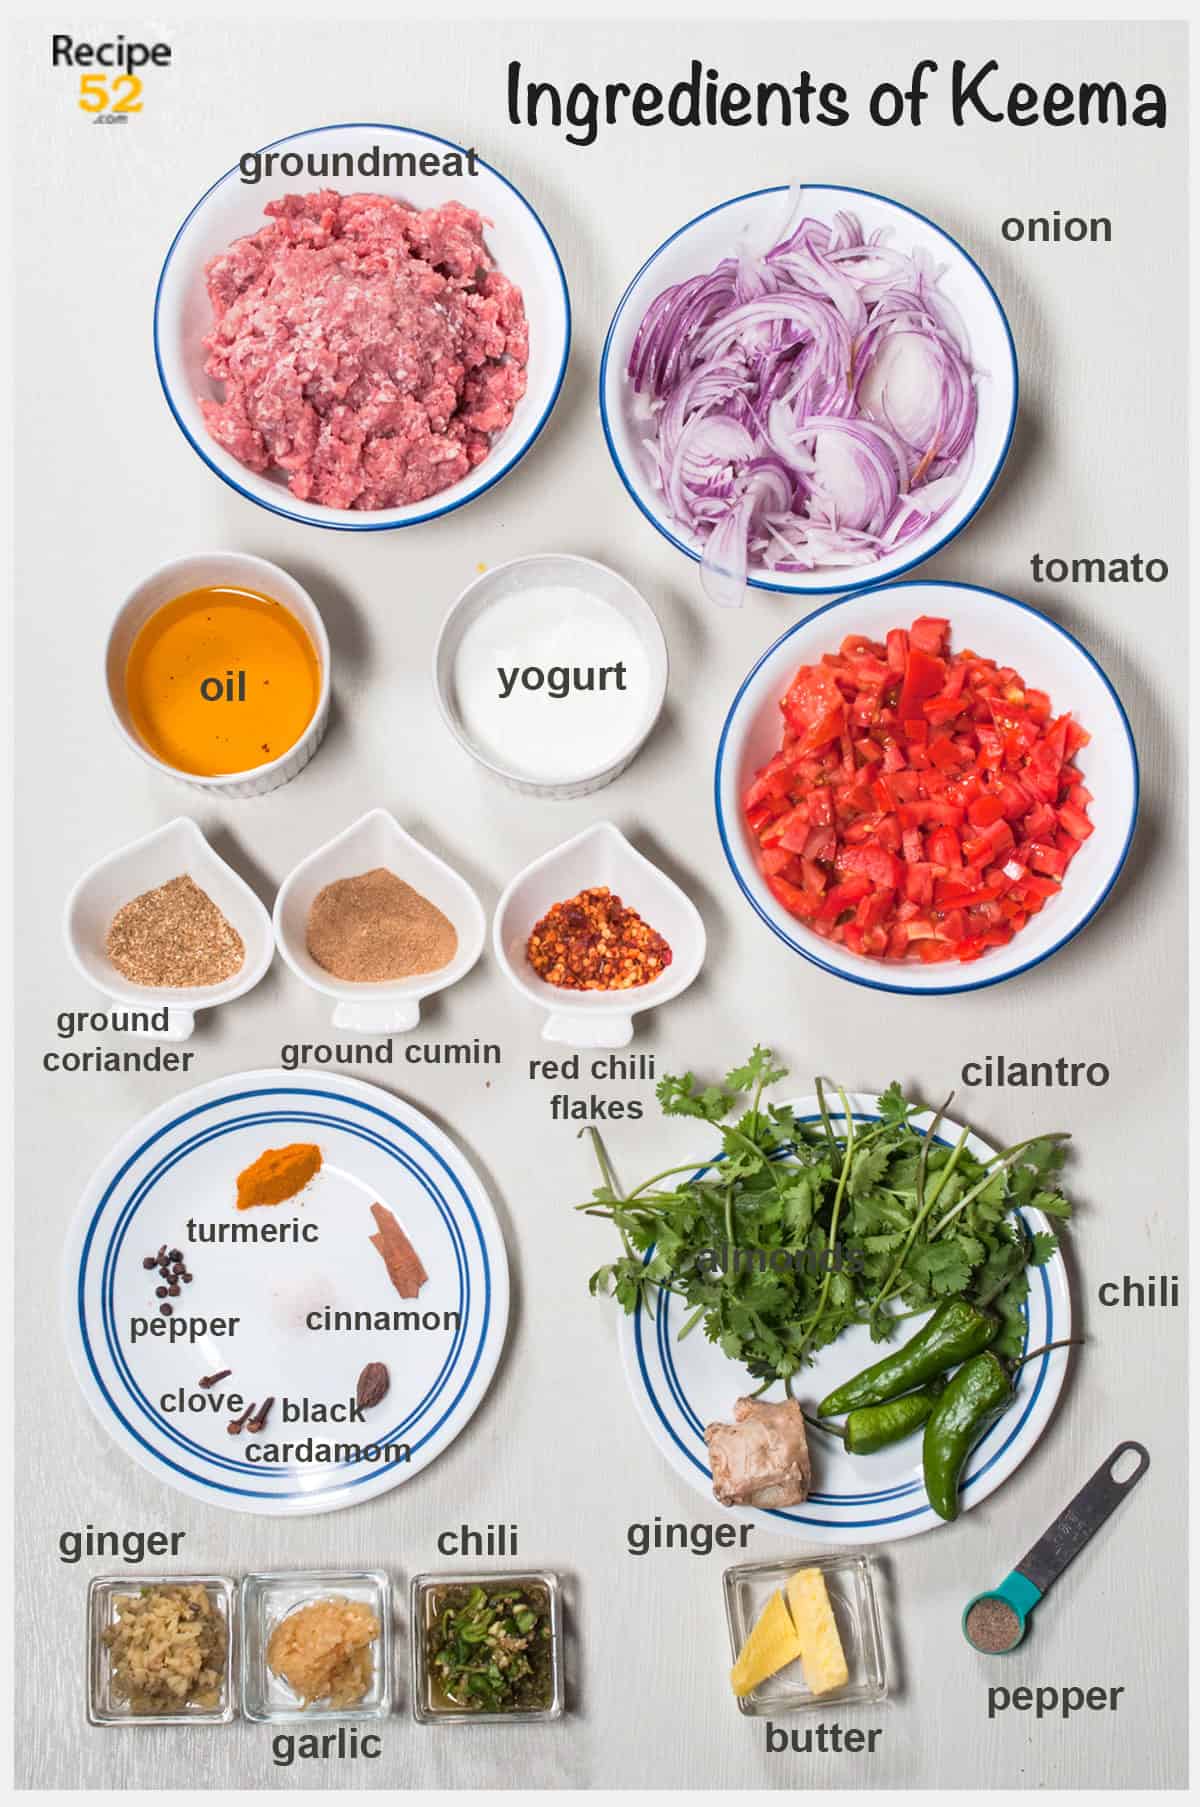 Ingredients of keema on a white background.